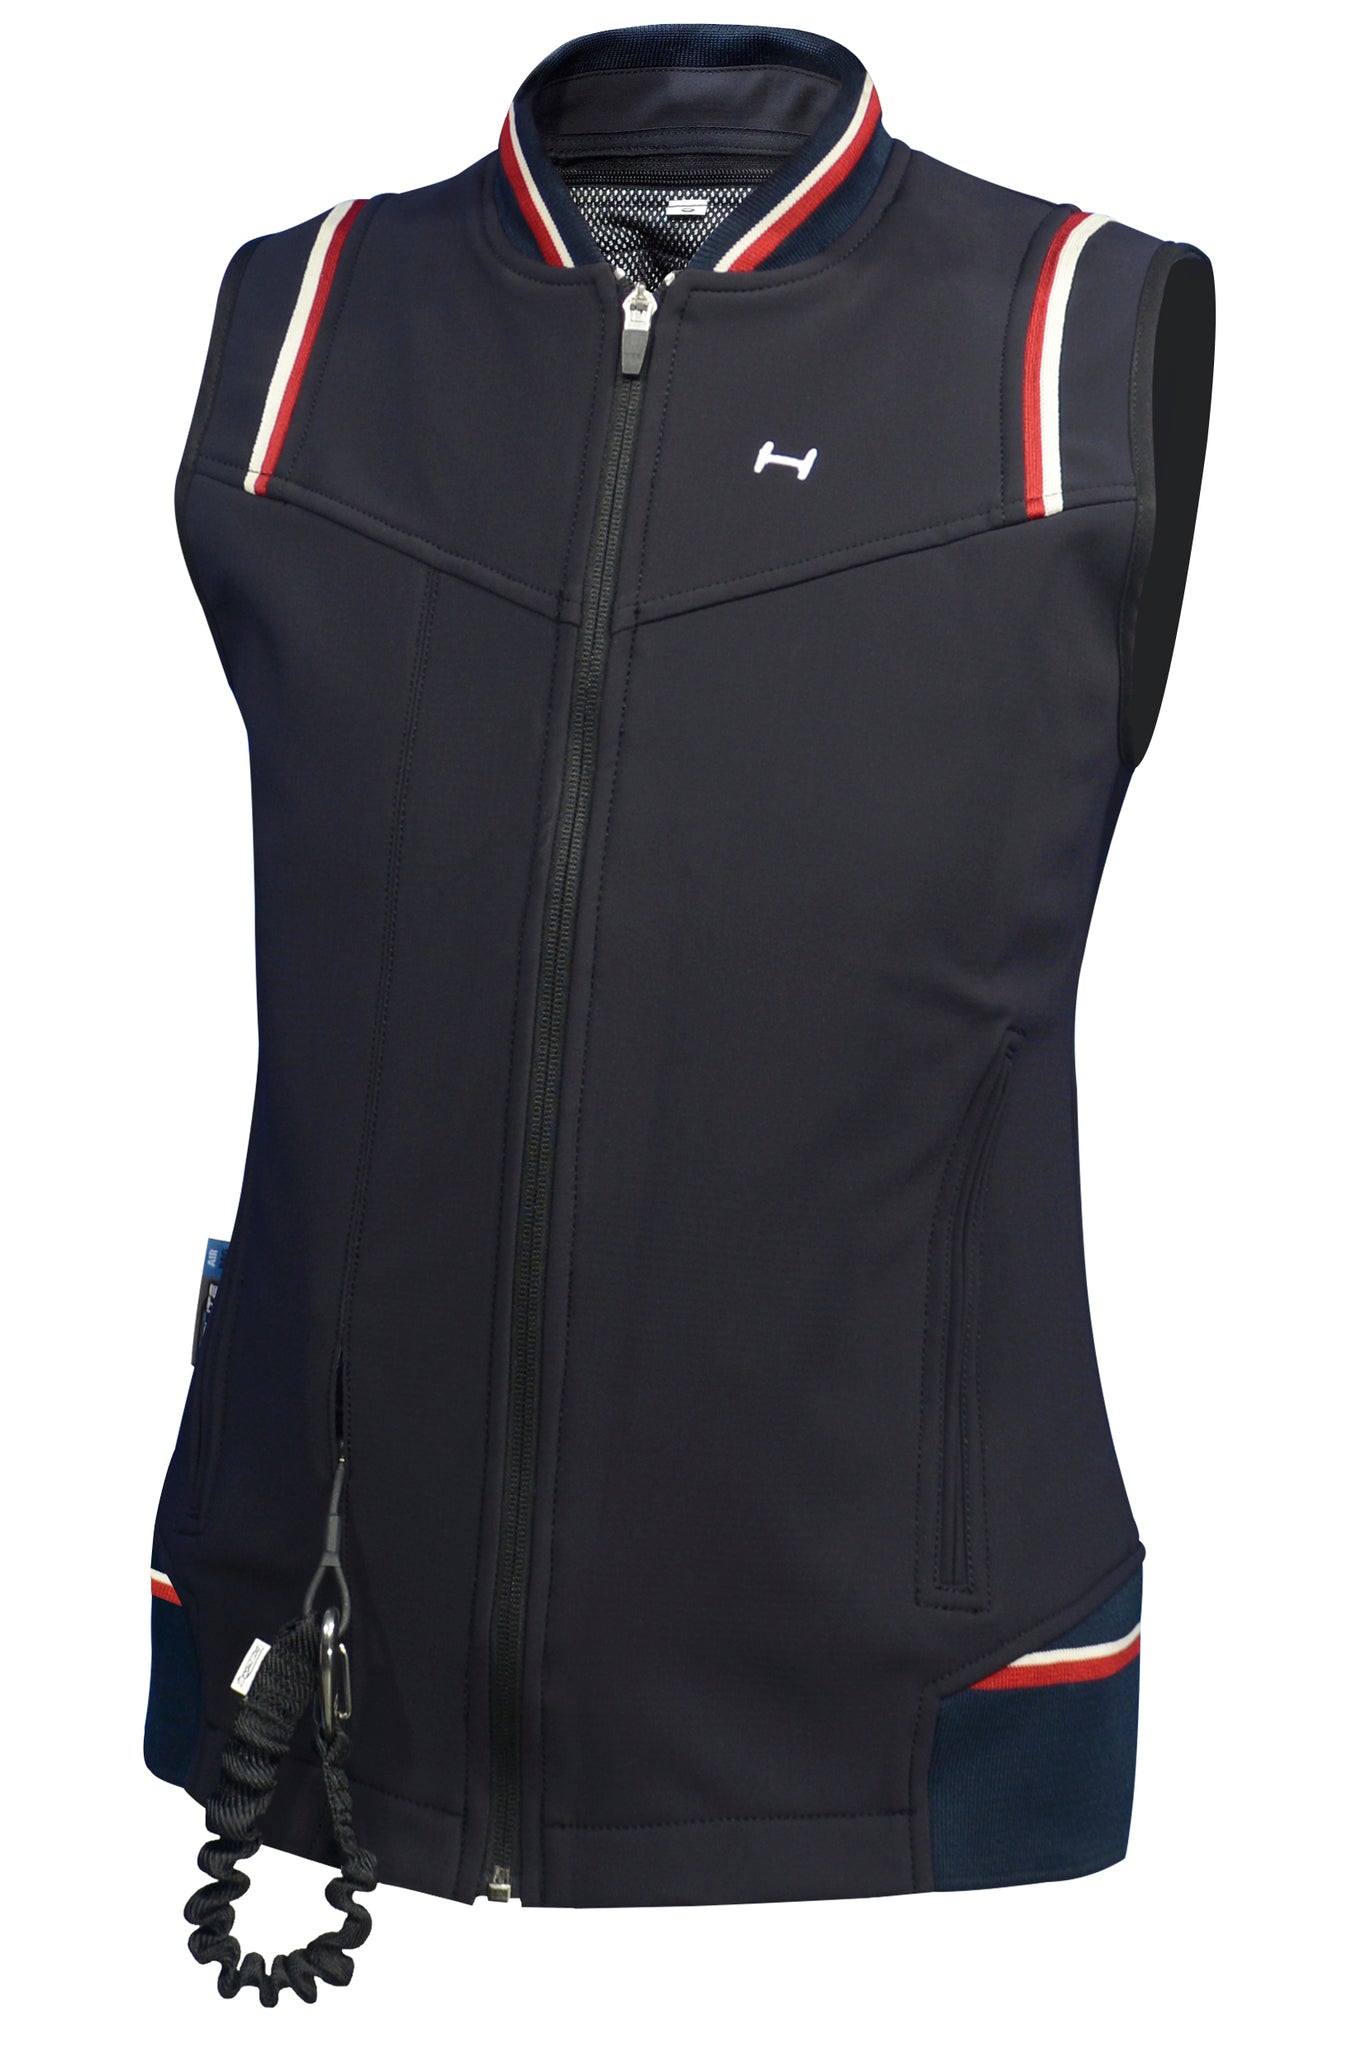 Helite Airshell Prestige Gilet - Dark Blue/Red - This is clothing for an air vest